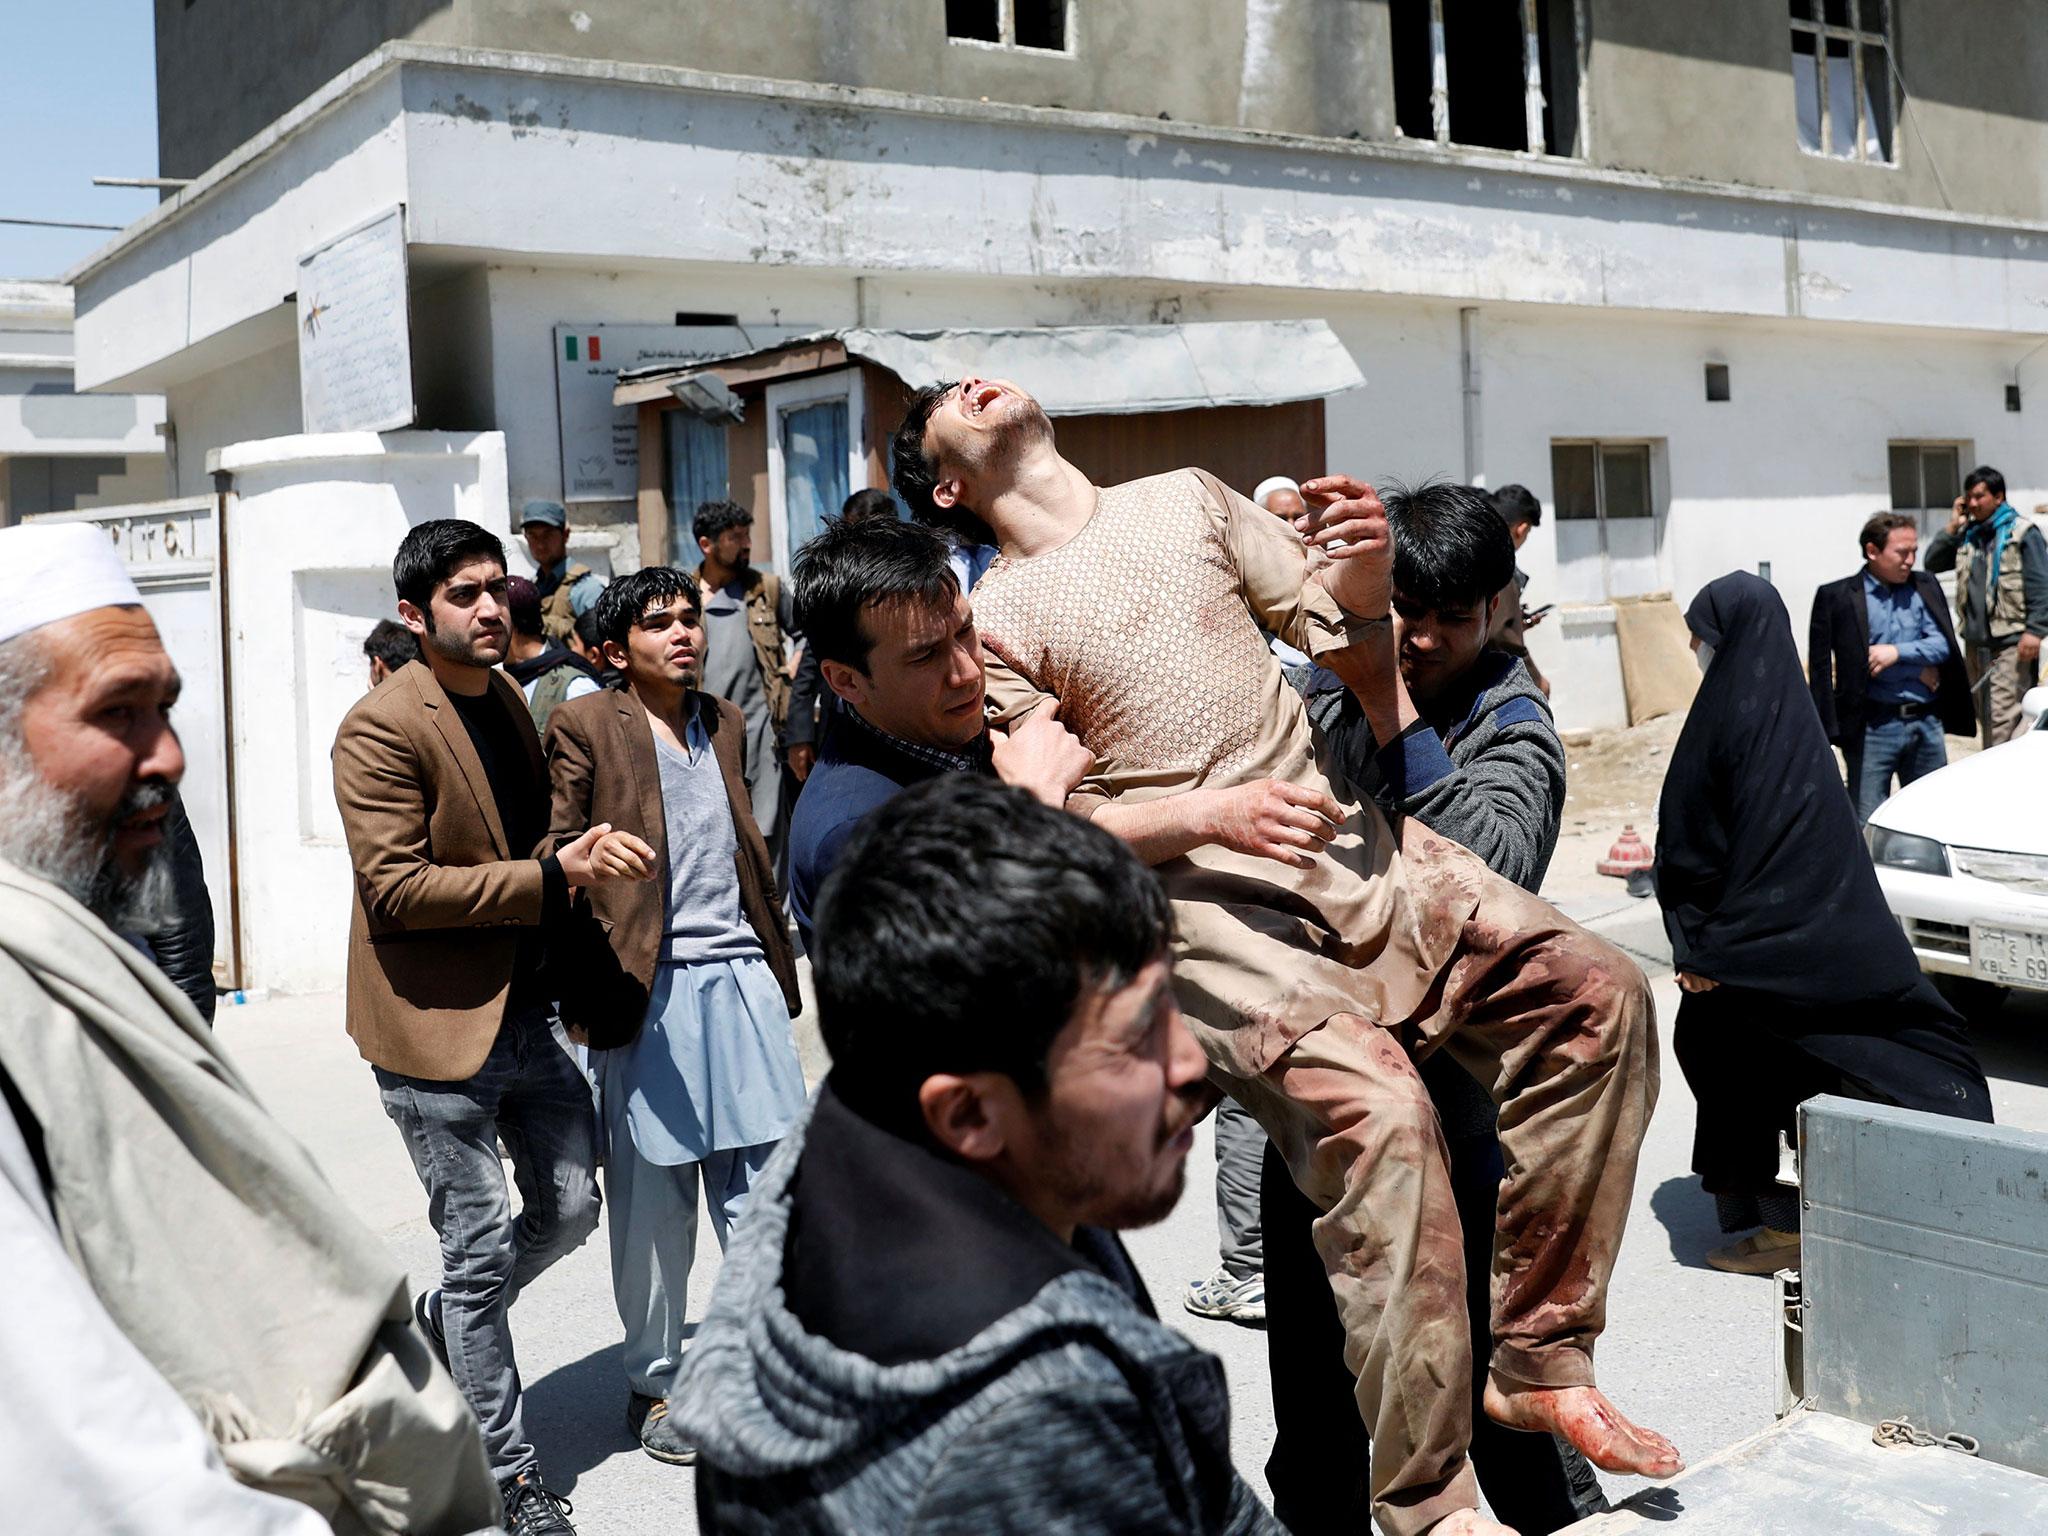 Relatives of the victims carry an injured man outside a hospital after a suicide attack in Kabul